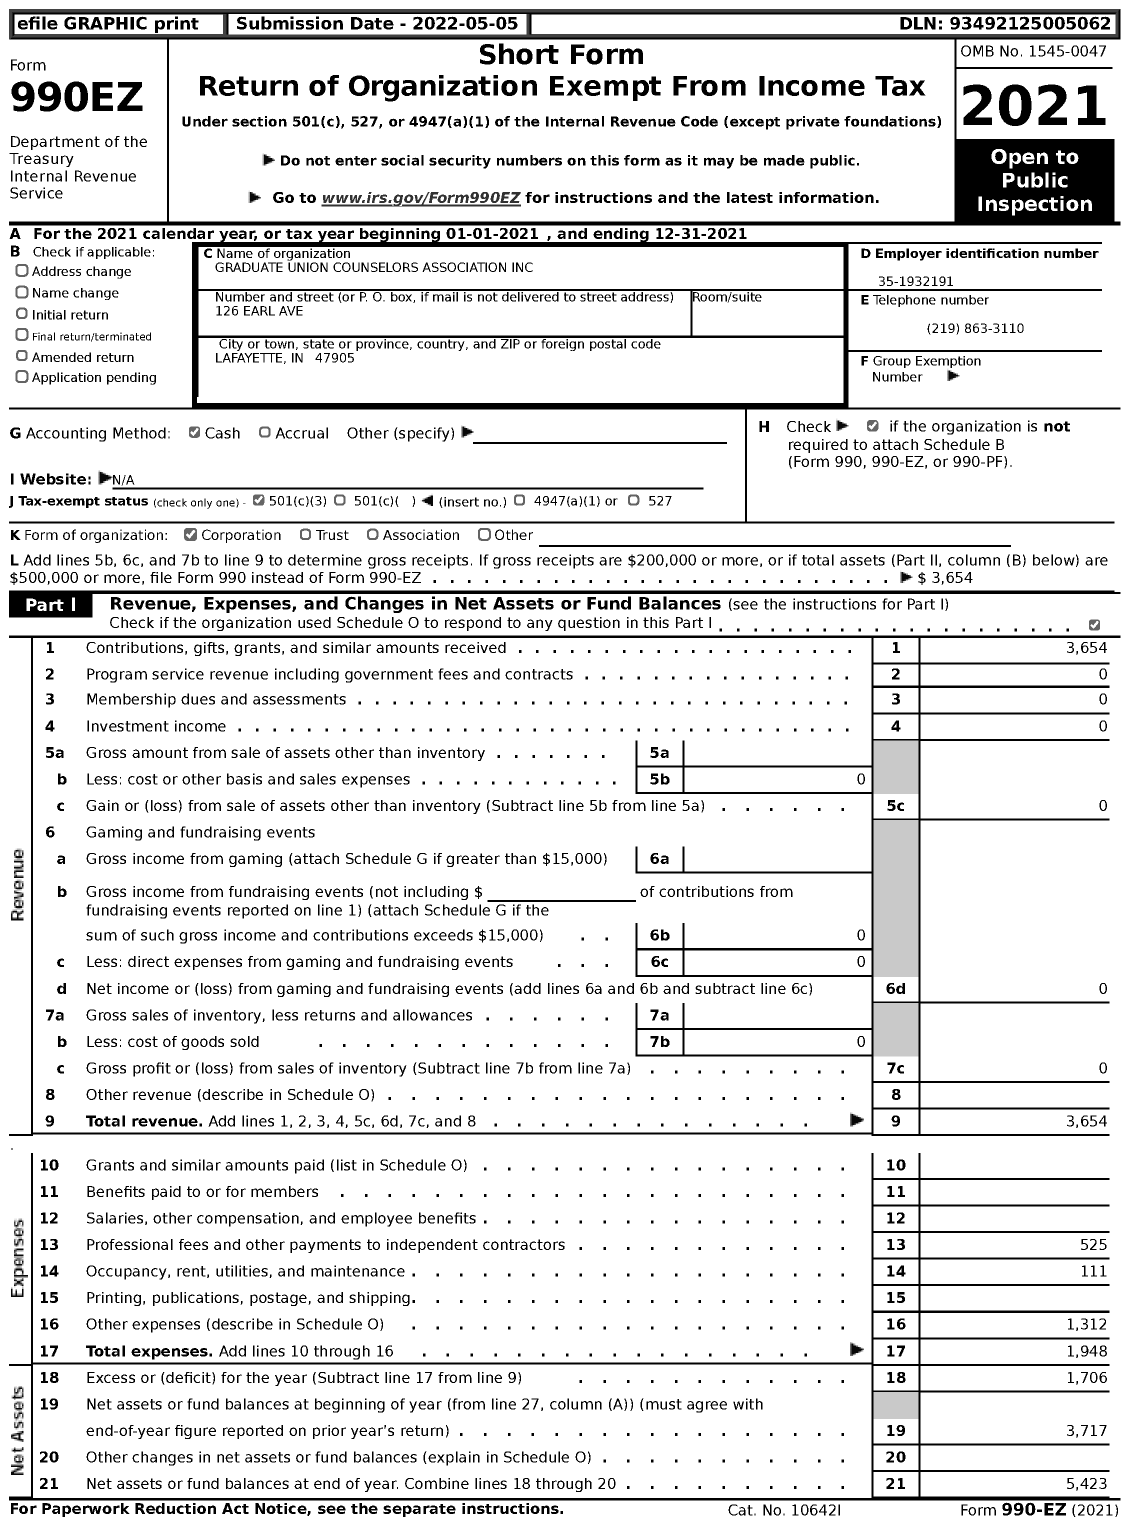 Image of first page of 2021 Form 990EZ for Graduate Union Counselors Association